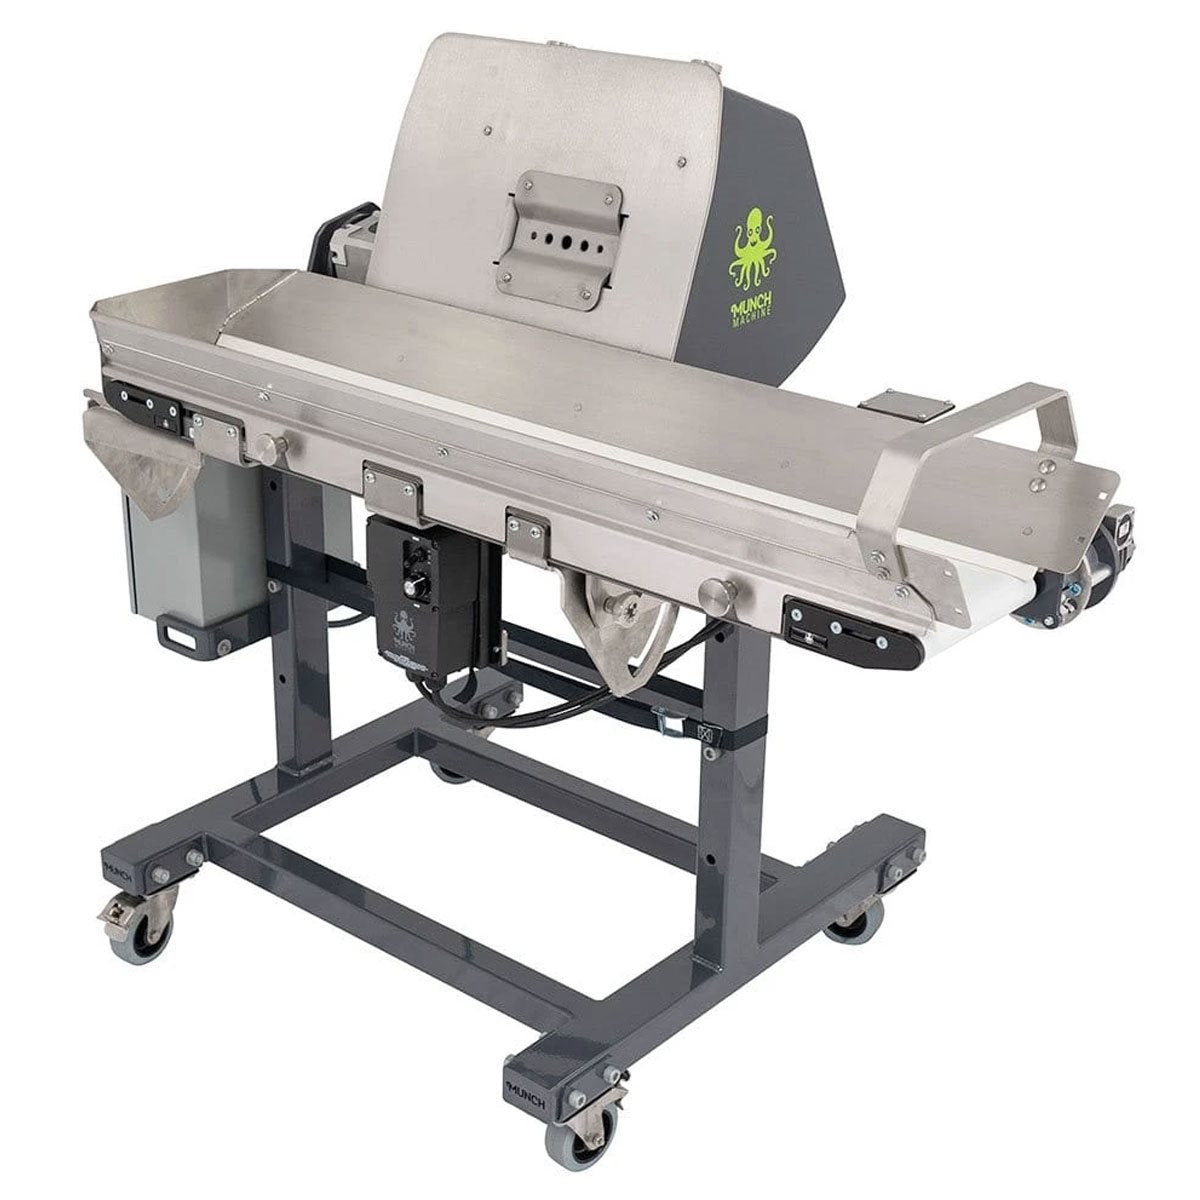 Product Image:Munch Machine Conveyor Single Bucker Rolling to the Right